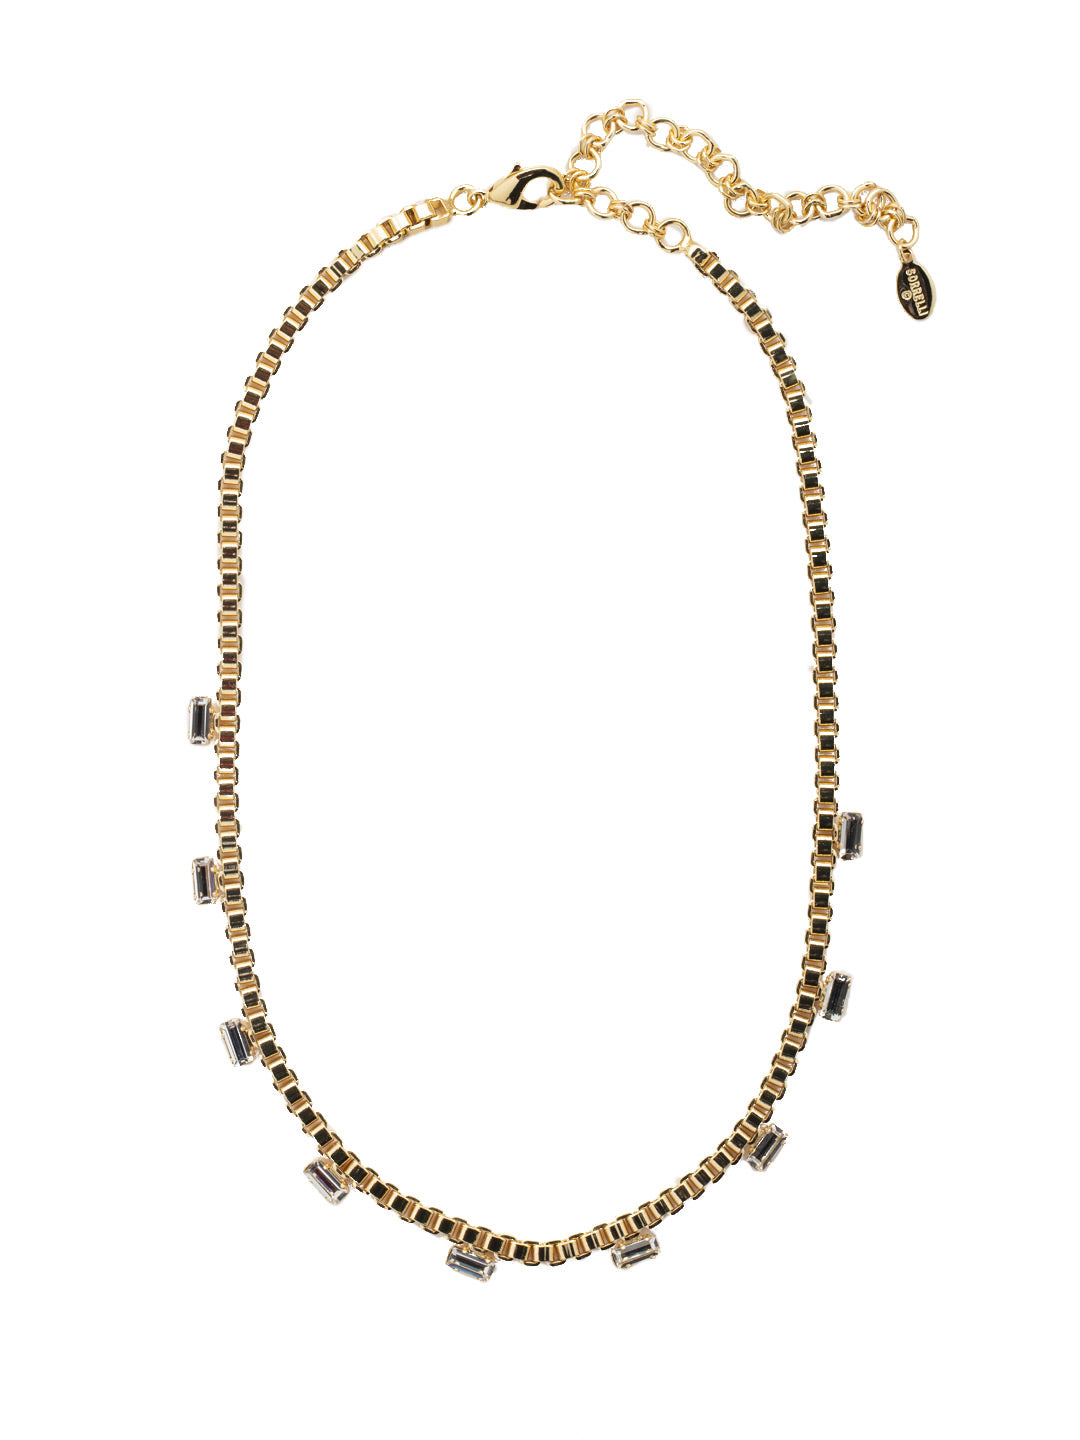 Cleo Classic Tennis Necklace - 4NEZ19BGCRY - The Cleo Classic Tennis Necklace features a row of emerald cut crystals on a box chain. The lobster claw clasp secures the necklace at various lengths. From Sorrelli's Crystal collection in our Bright Gold-tone finish.